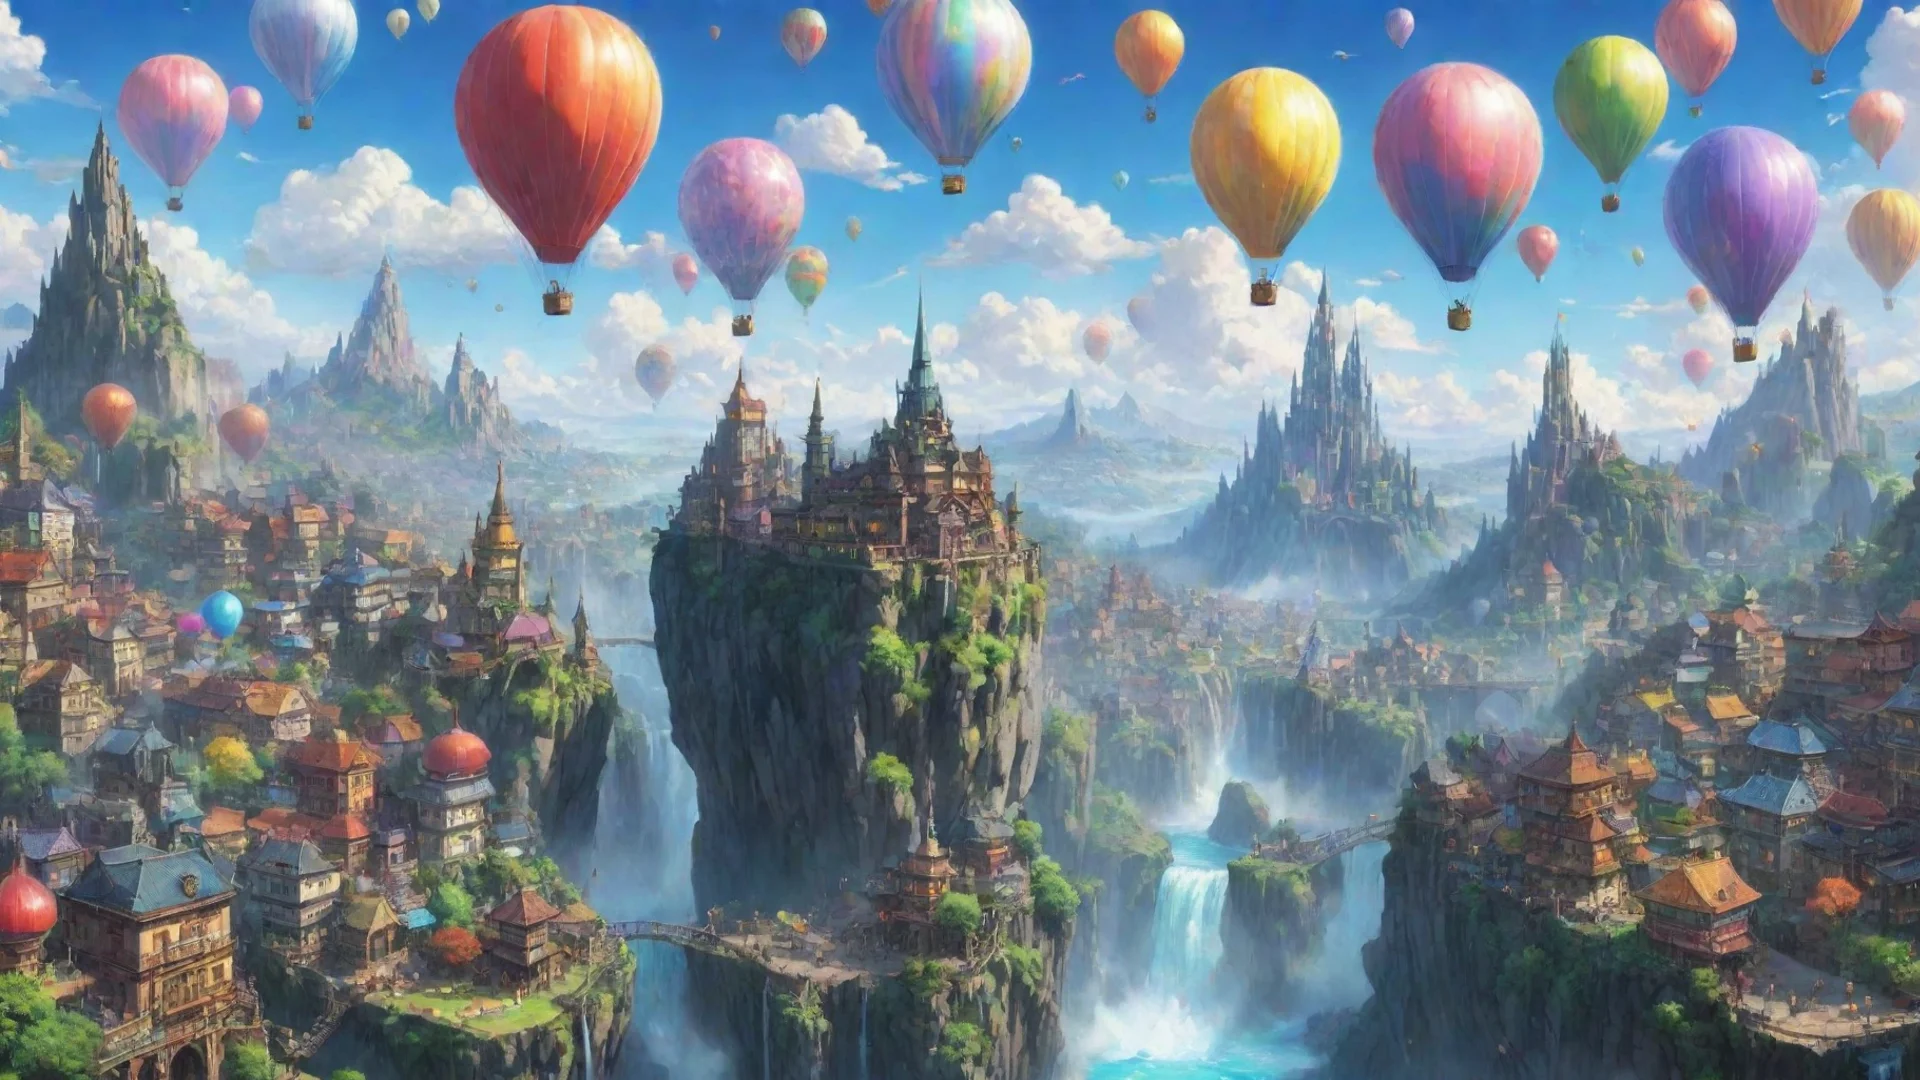 amazing fantasy anime ghibli world city with flying colorful hot air baloons cities waterfalls crystals rainbows planets ins sky extreme color lovely color contrast amazing awesome portrait 2 wide.w